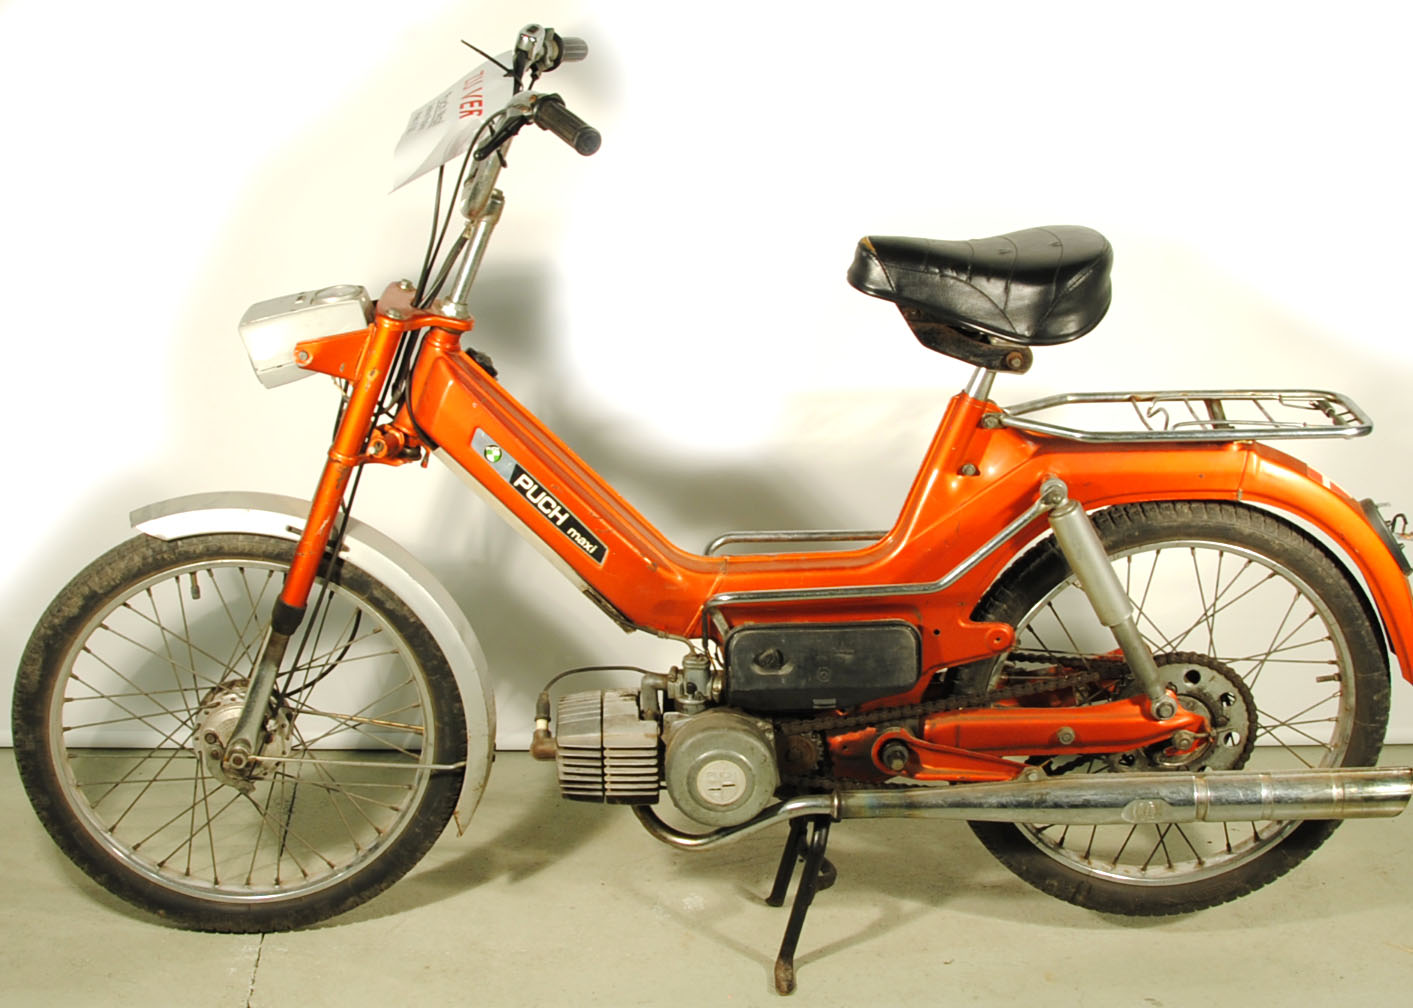 https://www.rbo.at/image/uploads/attachments/market_item/33/image/Puch_Maxi_orange.jpg